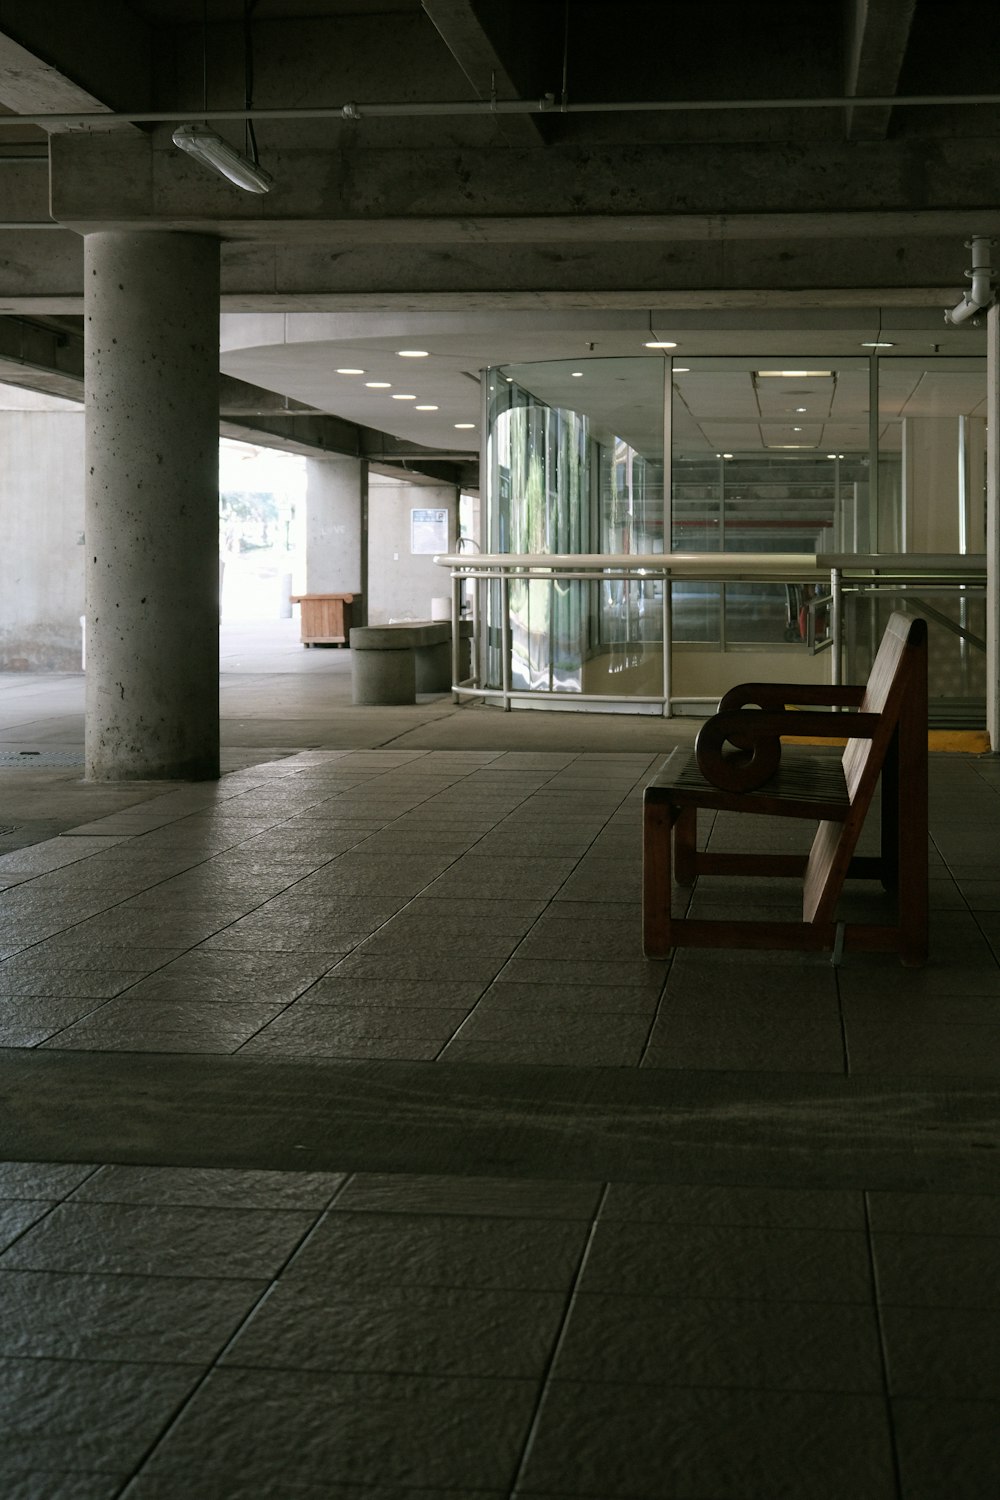 a bench sitting in the middle of an empty parking garage